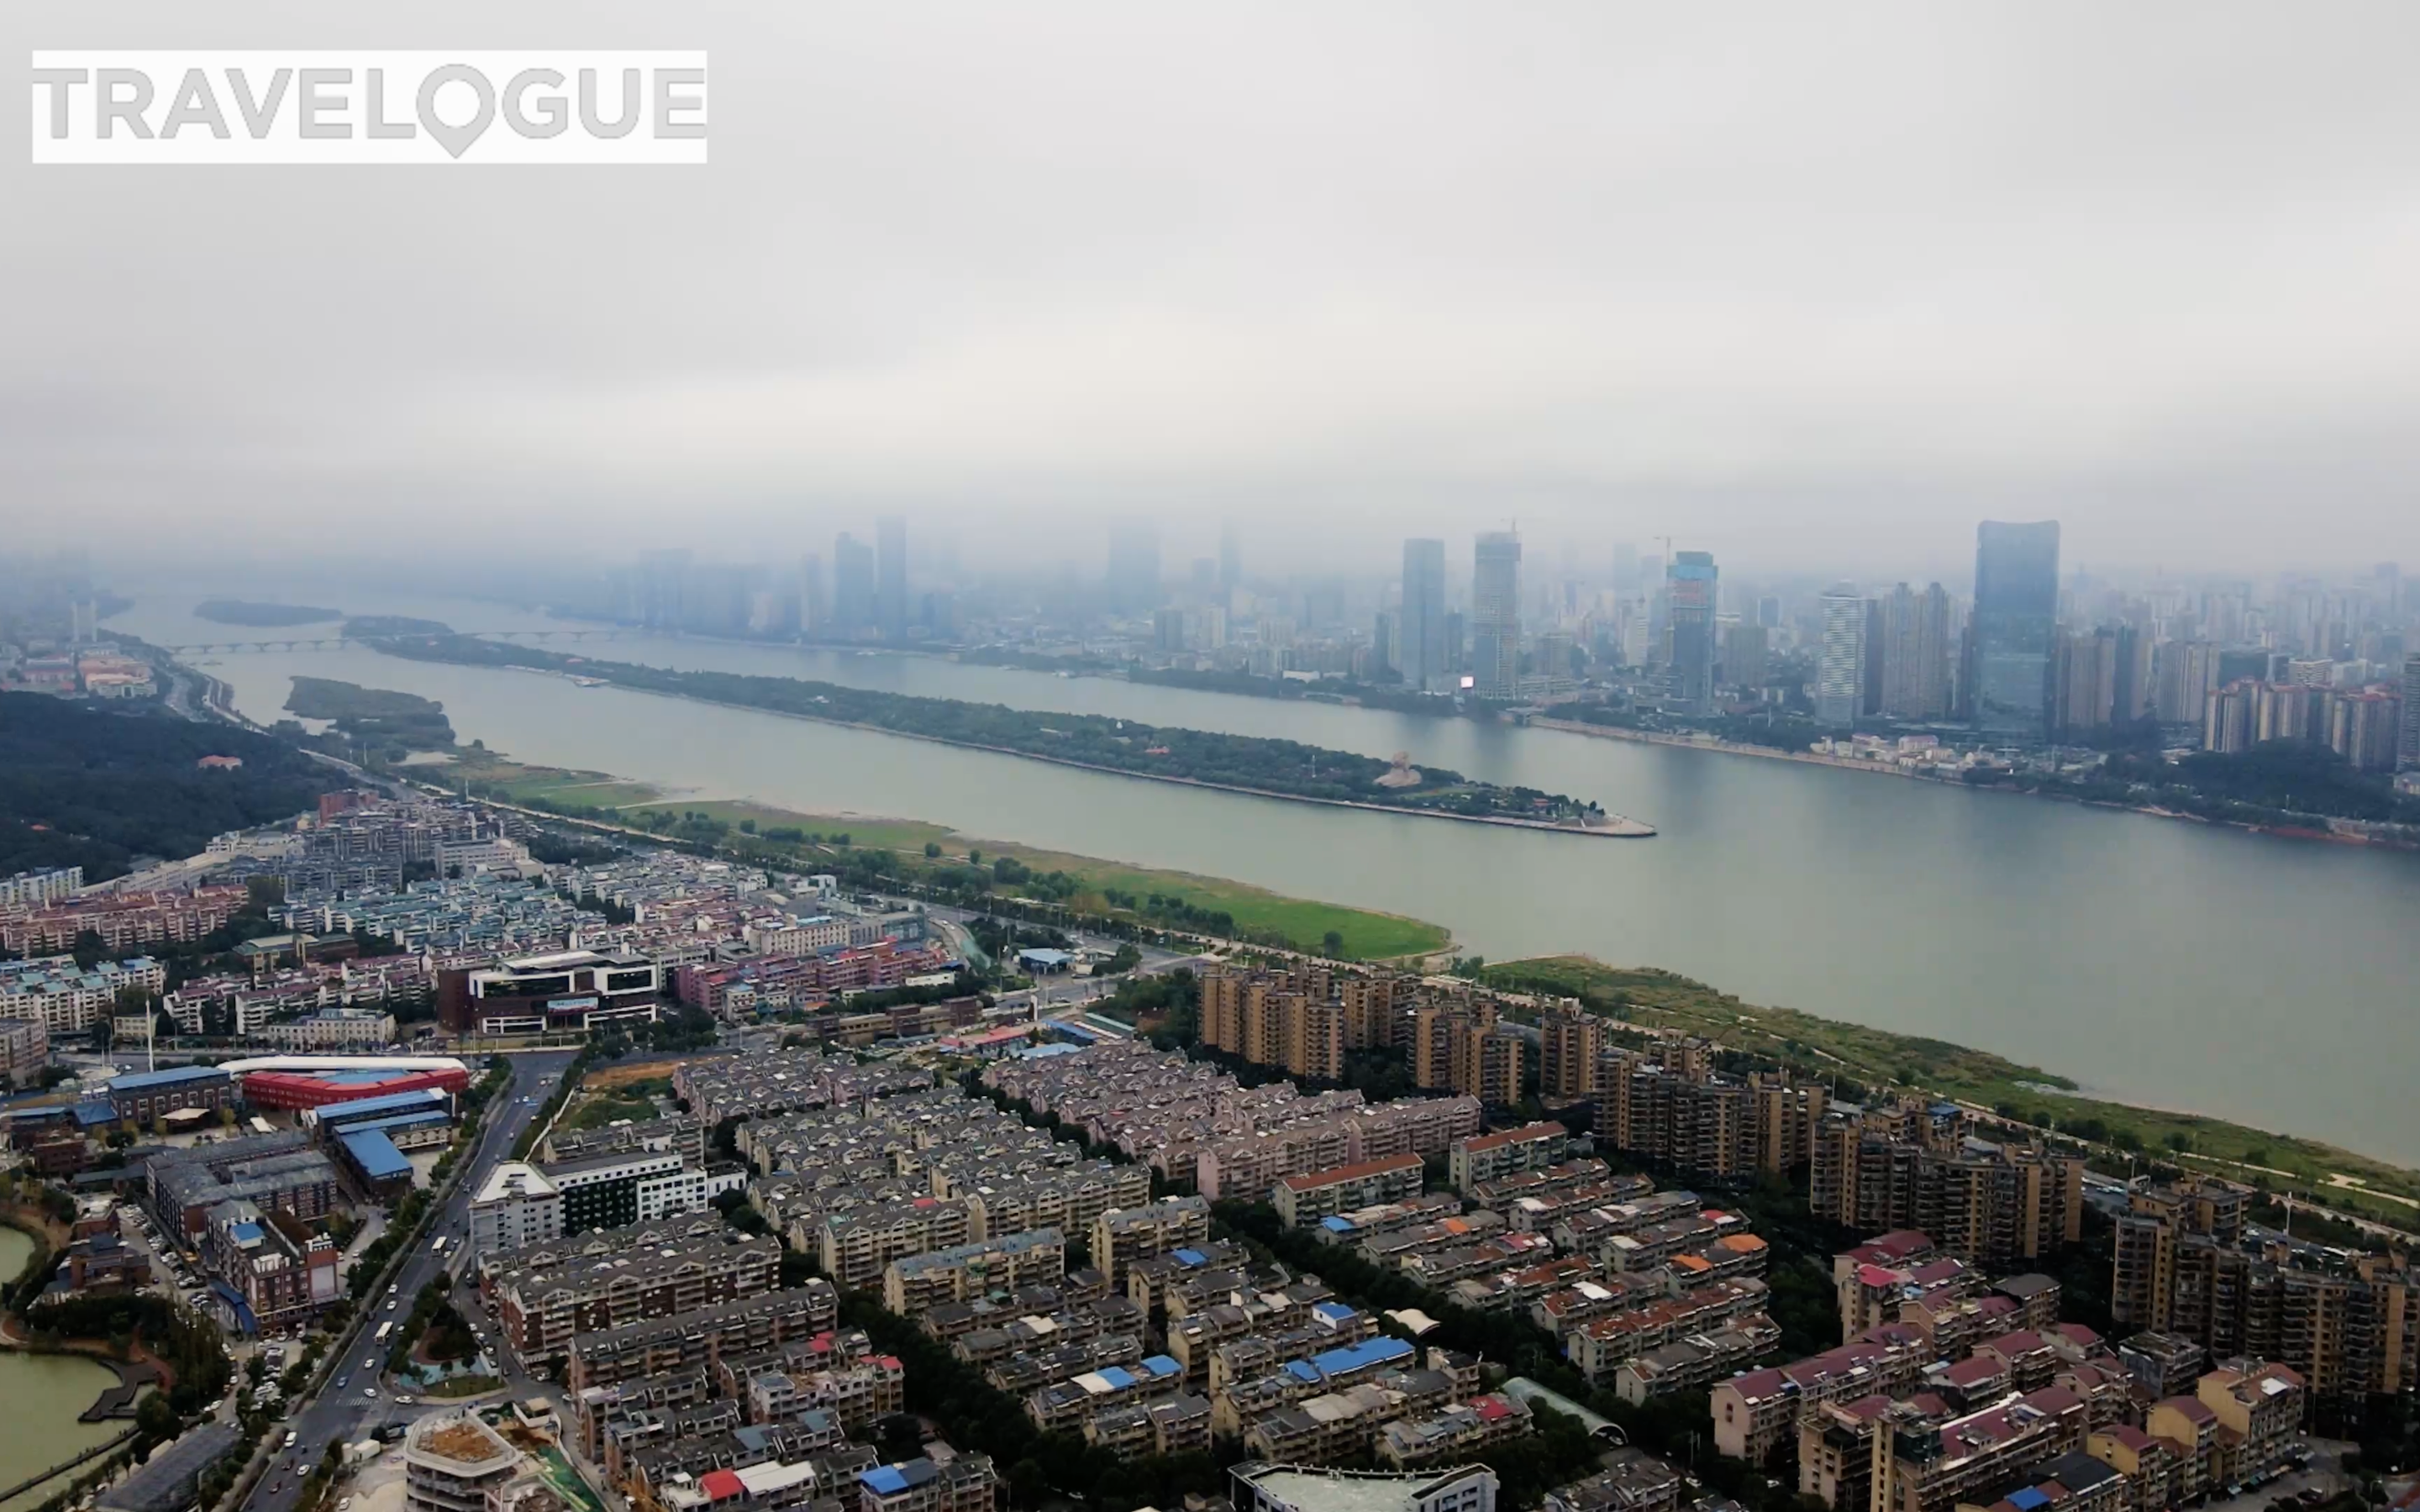 The Liuyang River has a special place in the hearts of Changsha people in central China's Hunan Province. Japanese teacher Noriko Nakamura lives right next to it. When she opens her window, the winding river unfolds before her eyes. As she says, 